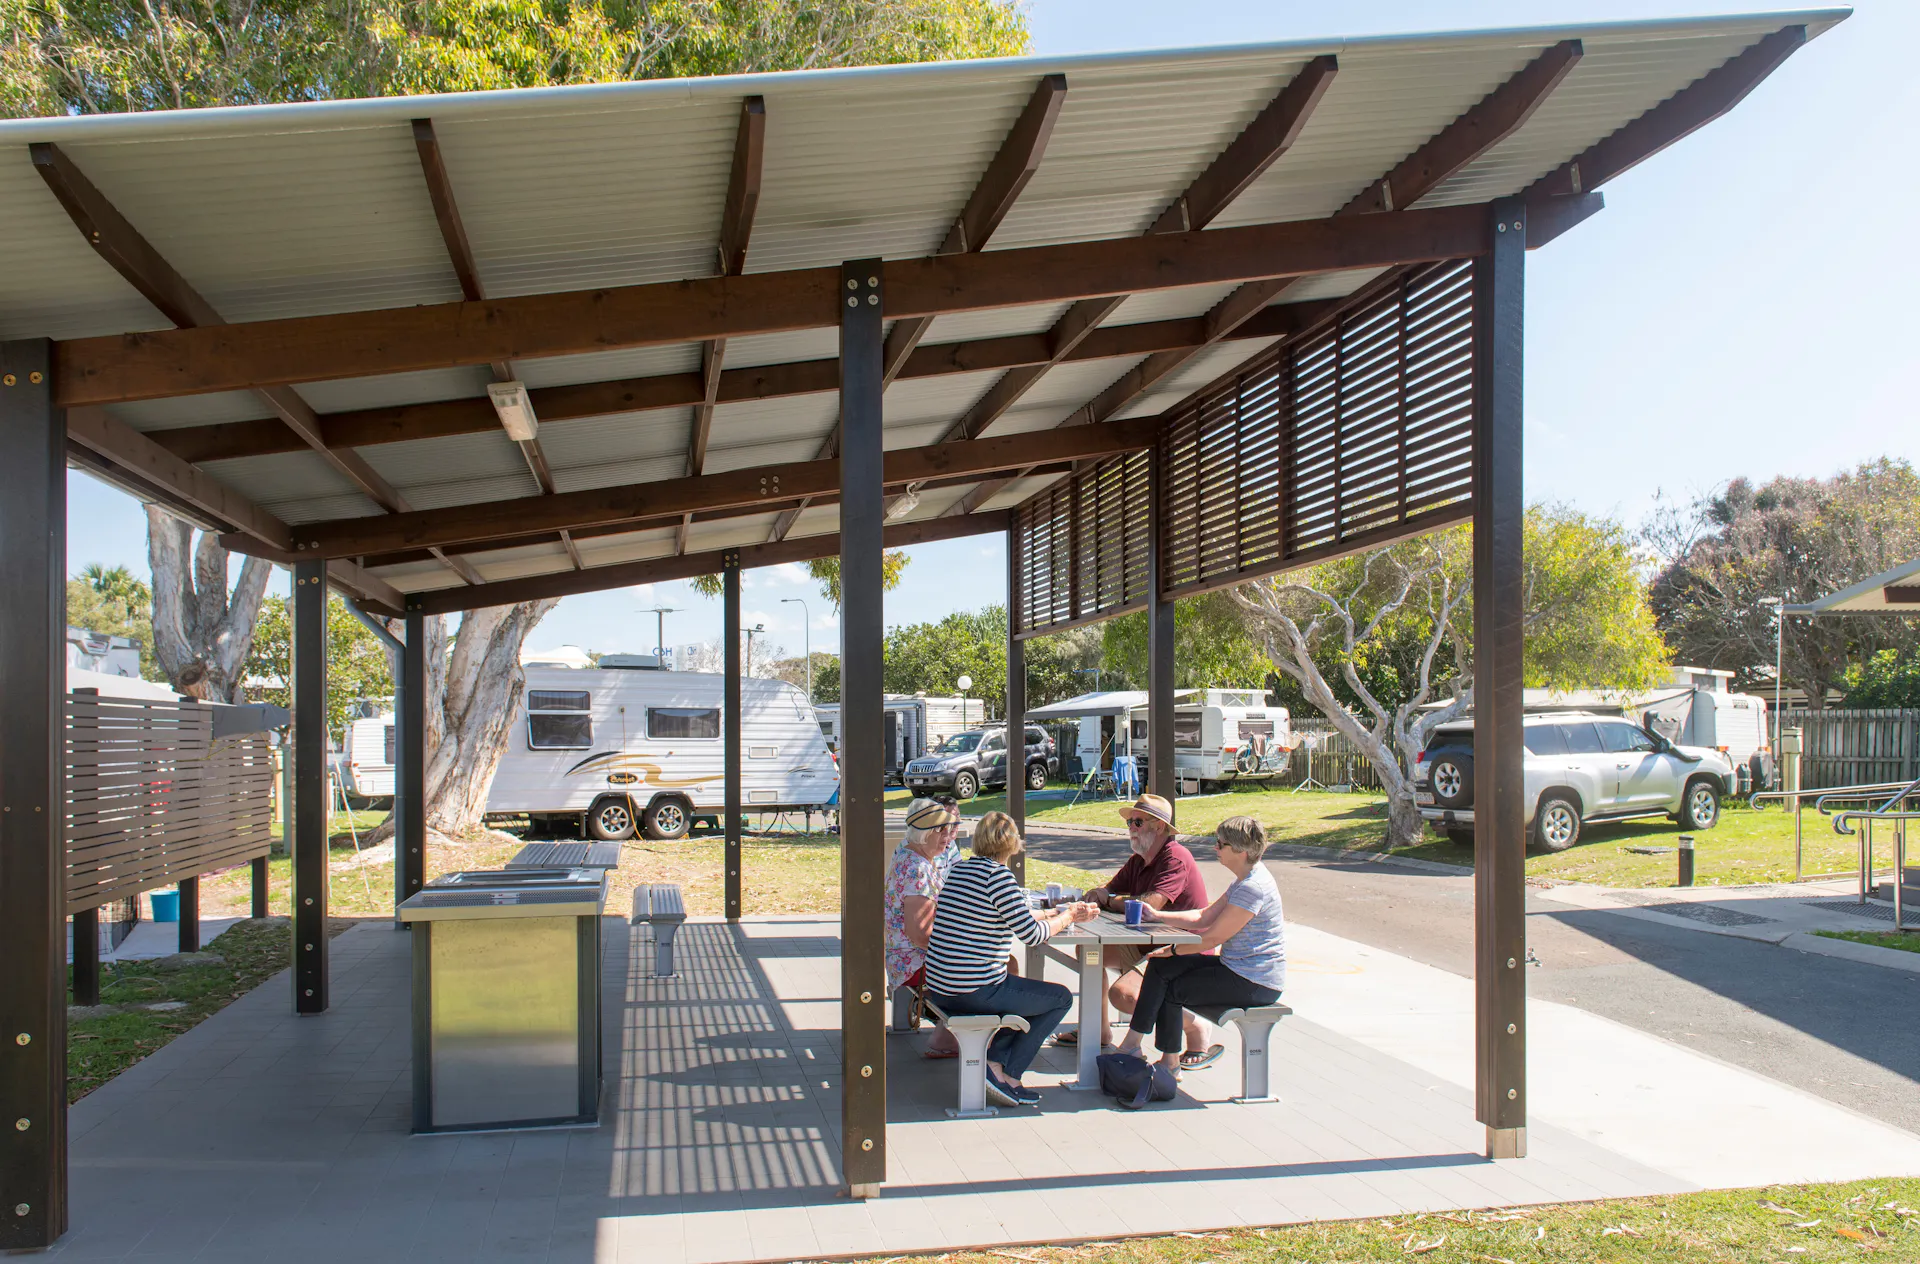 Image of Coolum Beach Holiday Park BBQ shelter with 3 women and 1 man sitting down at a table